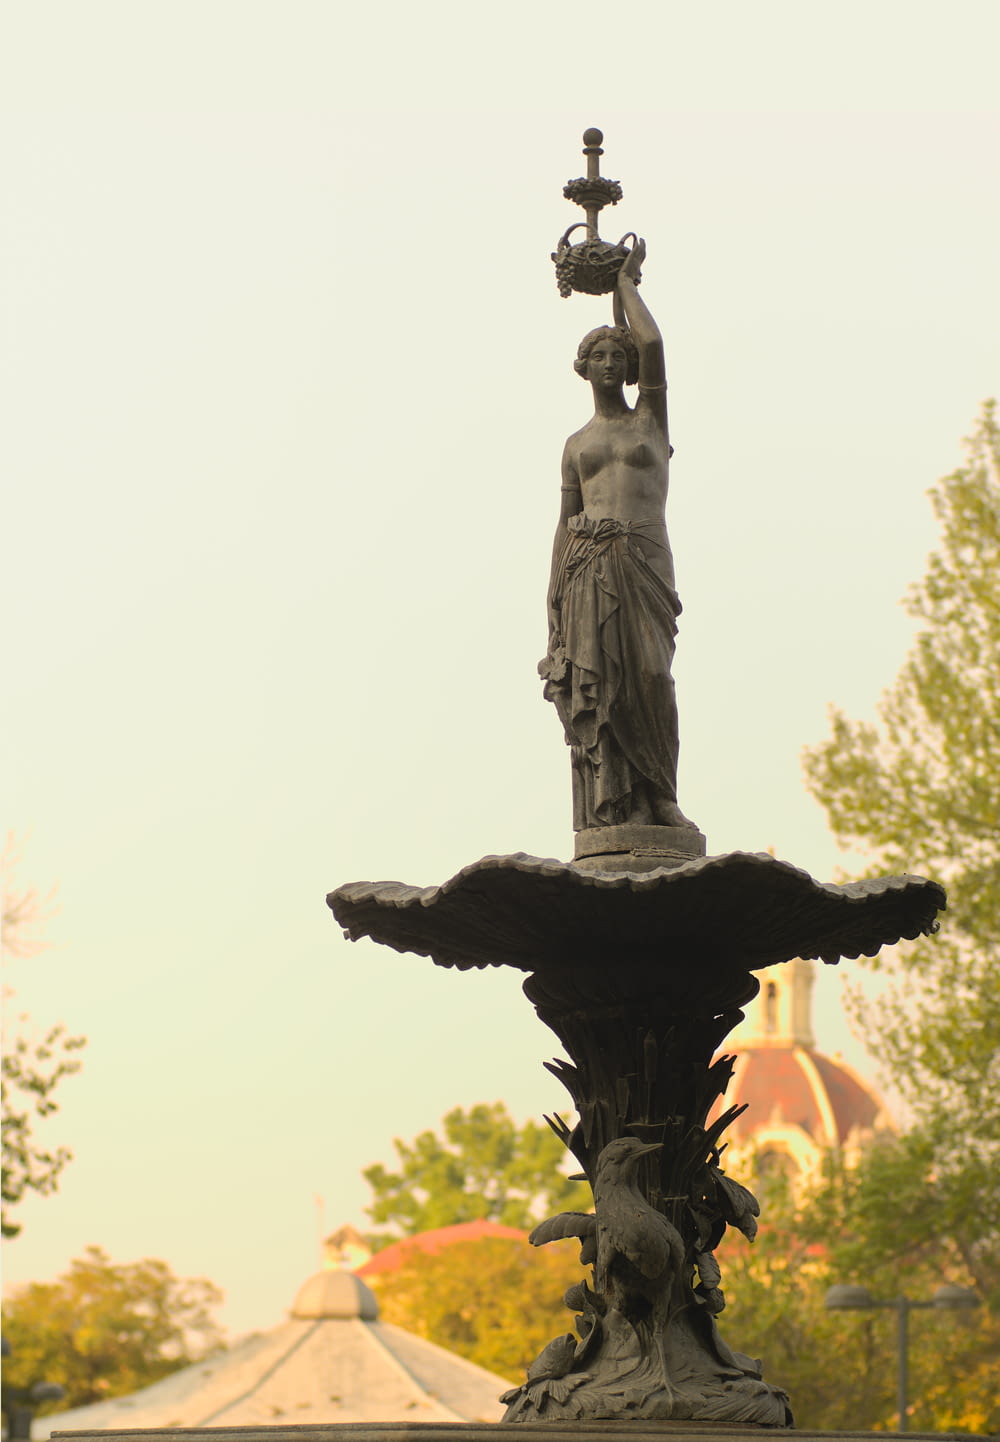 a statue of a woman holding a lamp on top of a fountain